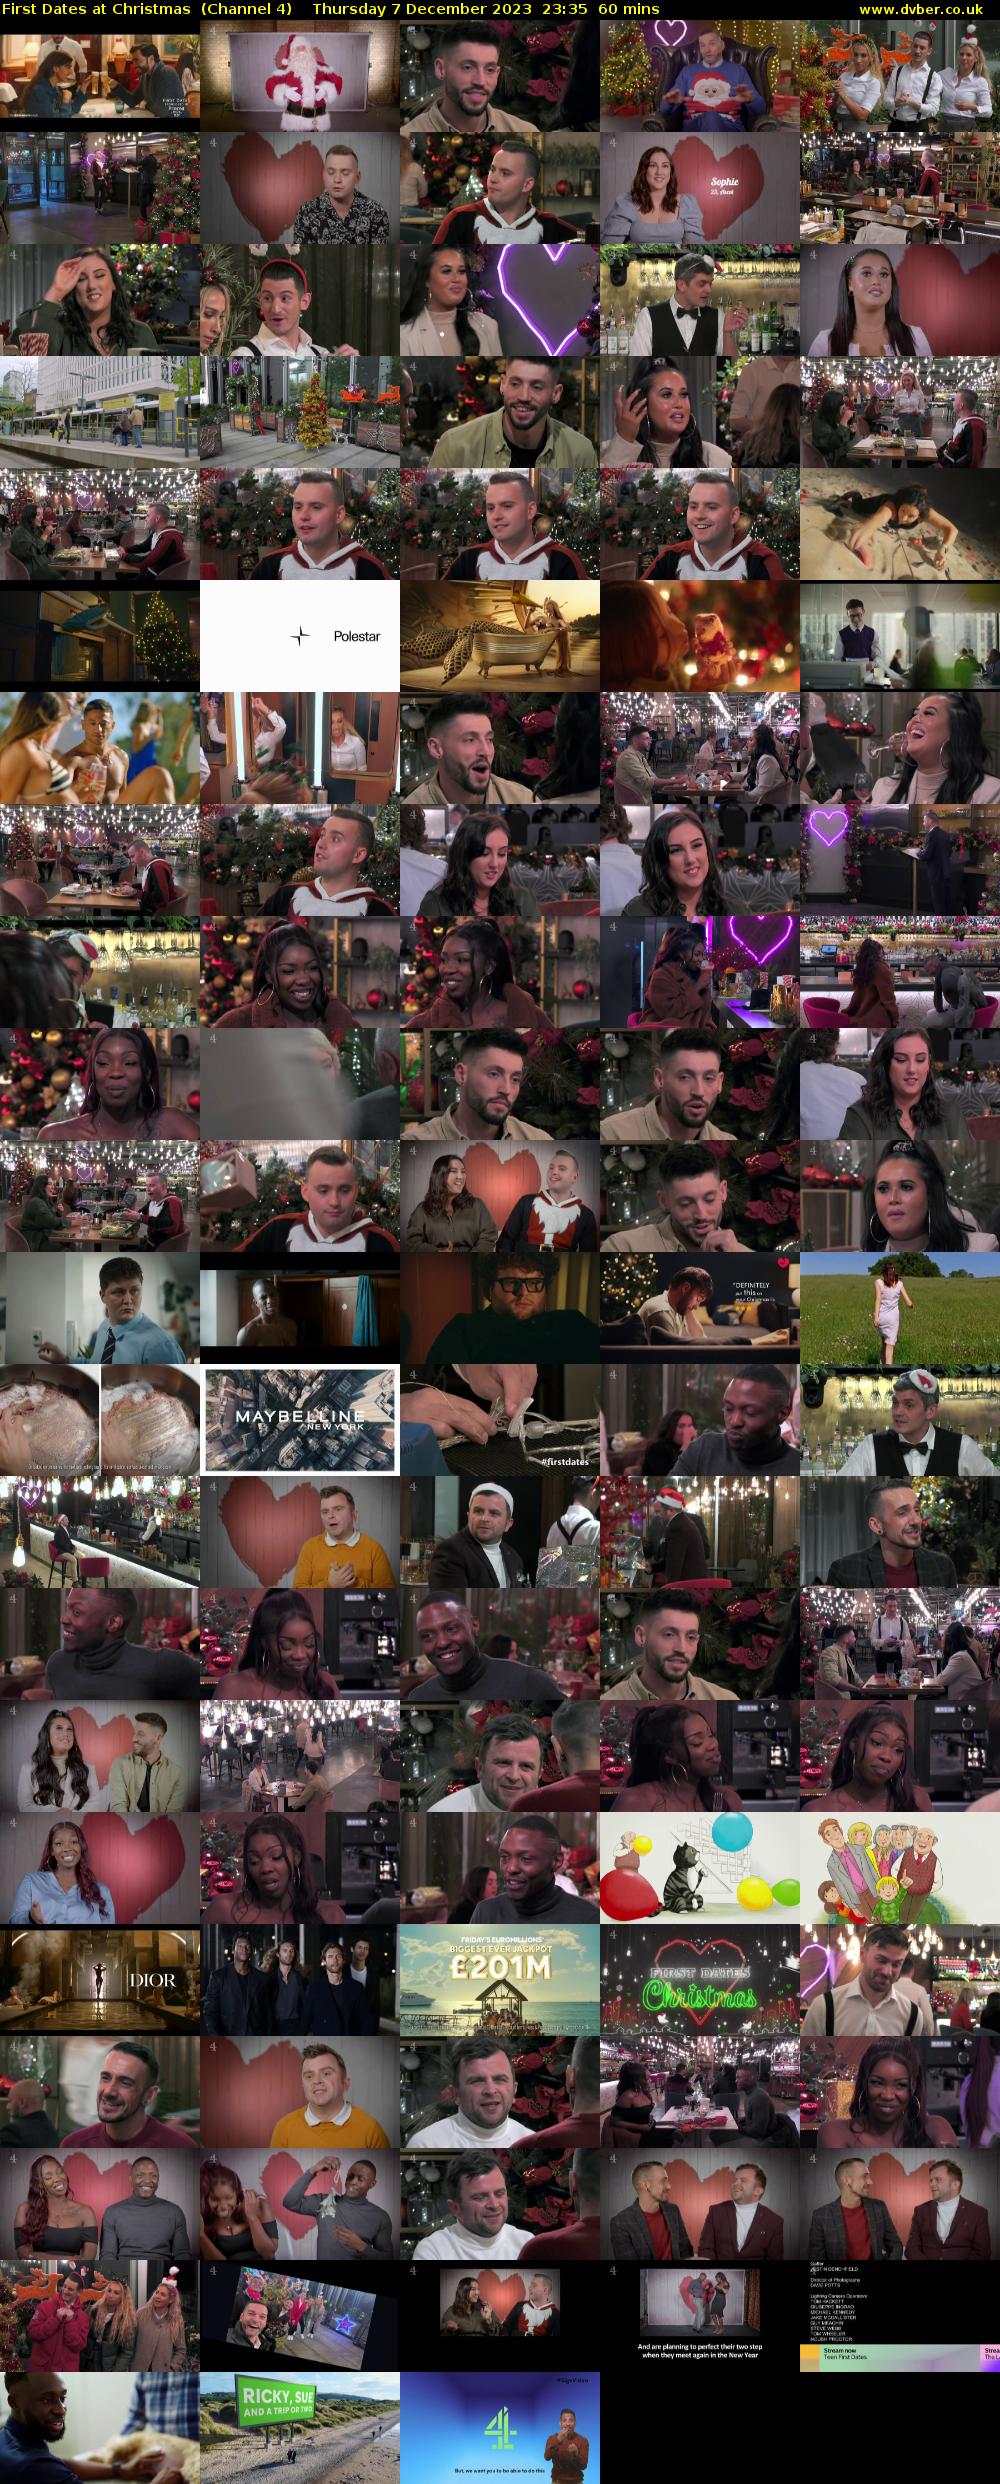 First Dates at Christmas  (Channel 4) Thursday 7 December 2023 23:35 - 00:35